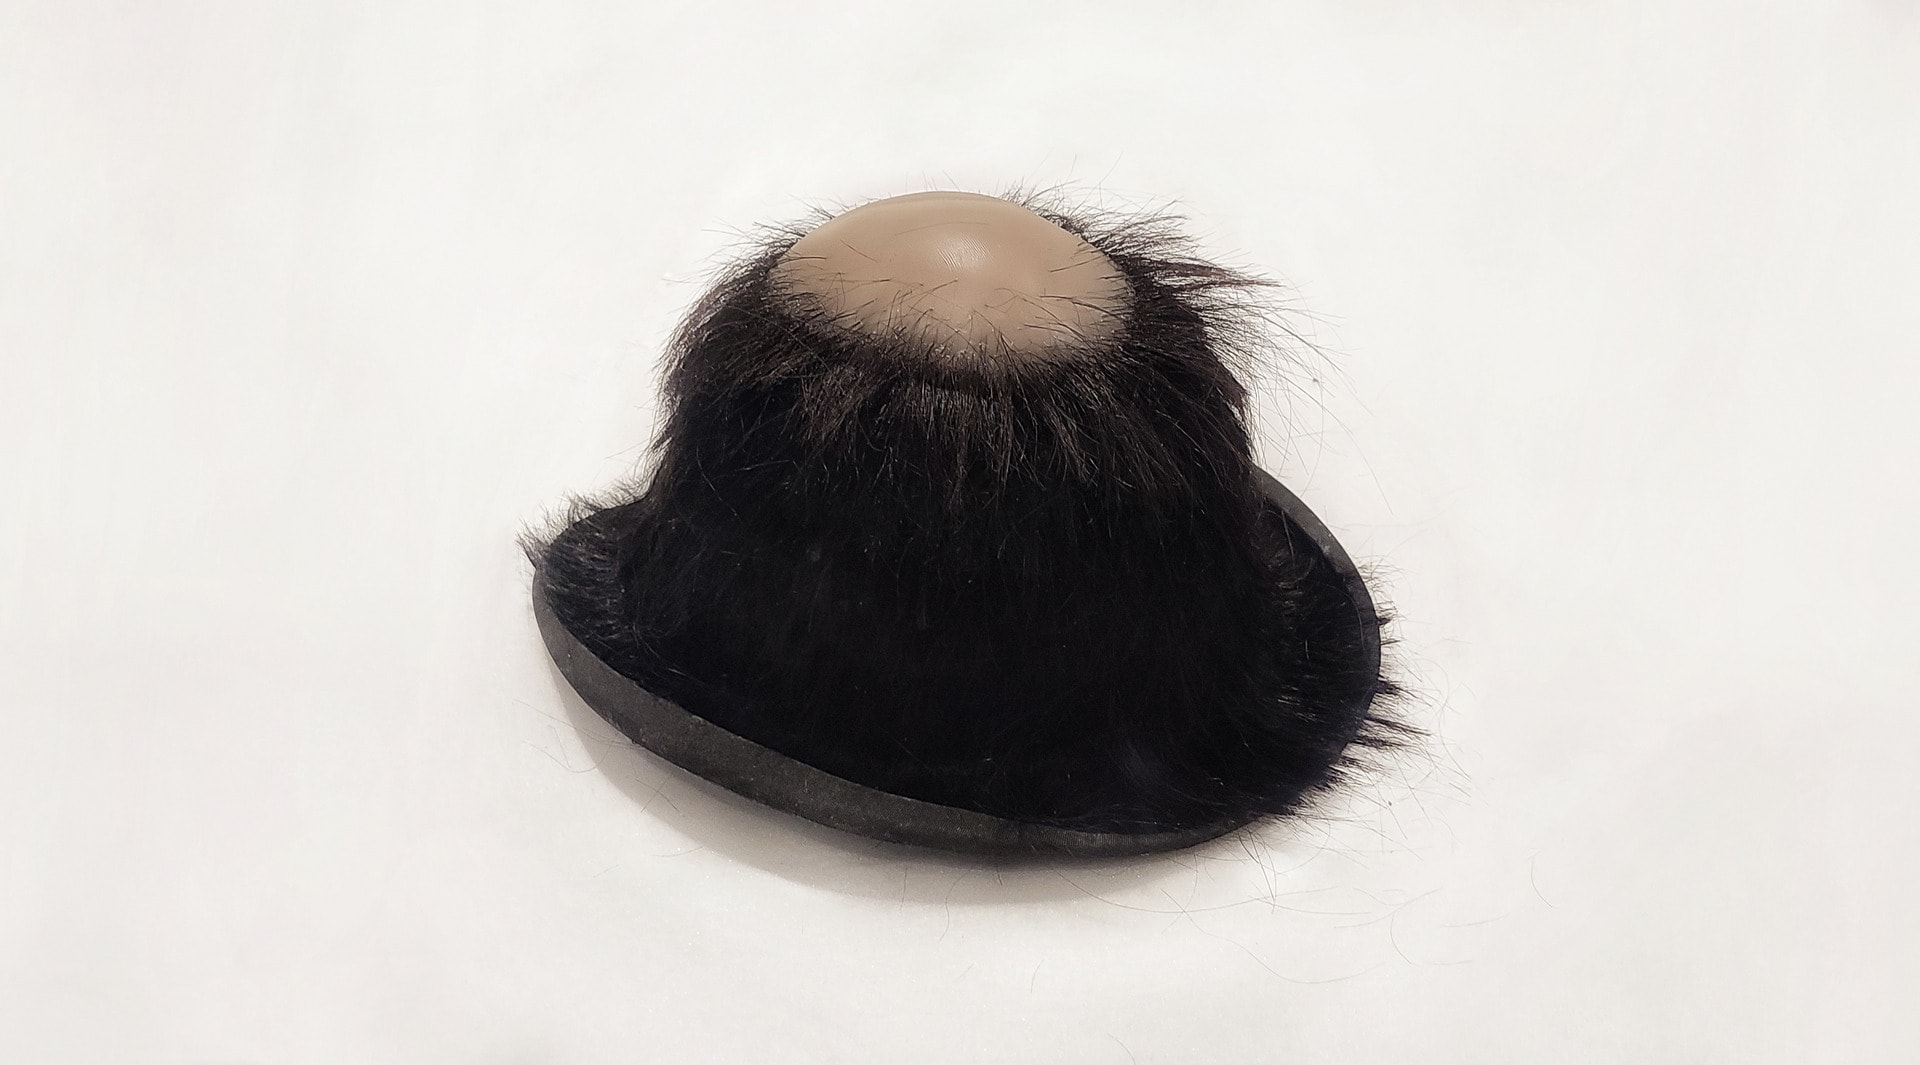 bald hat on table image 